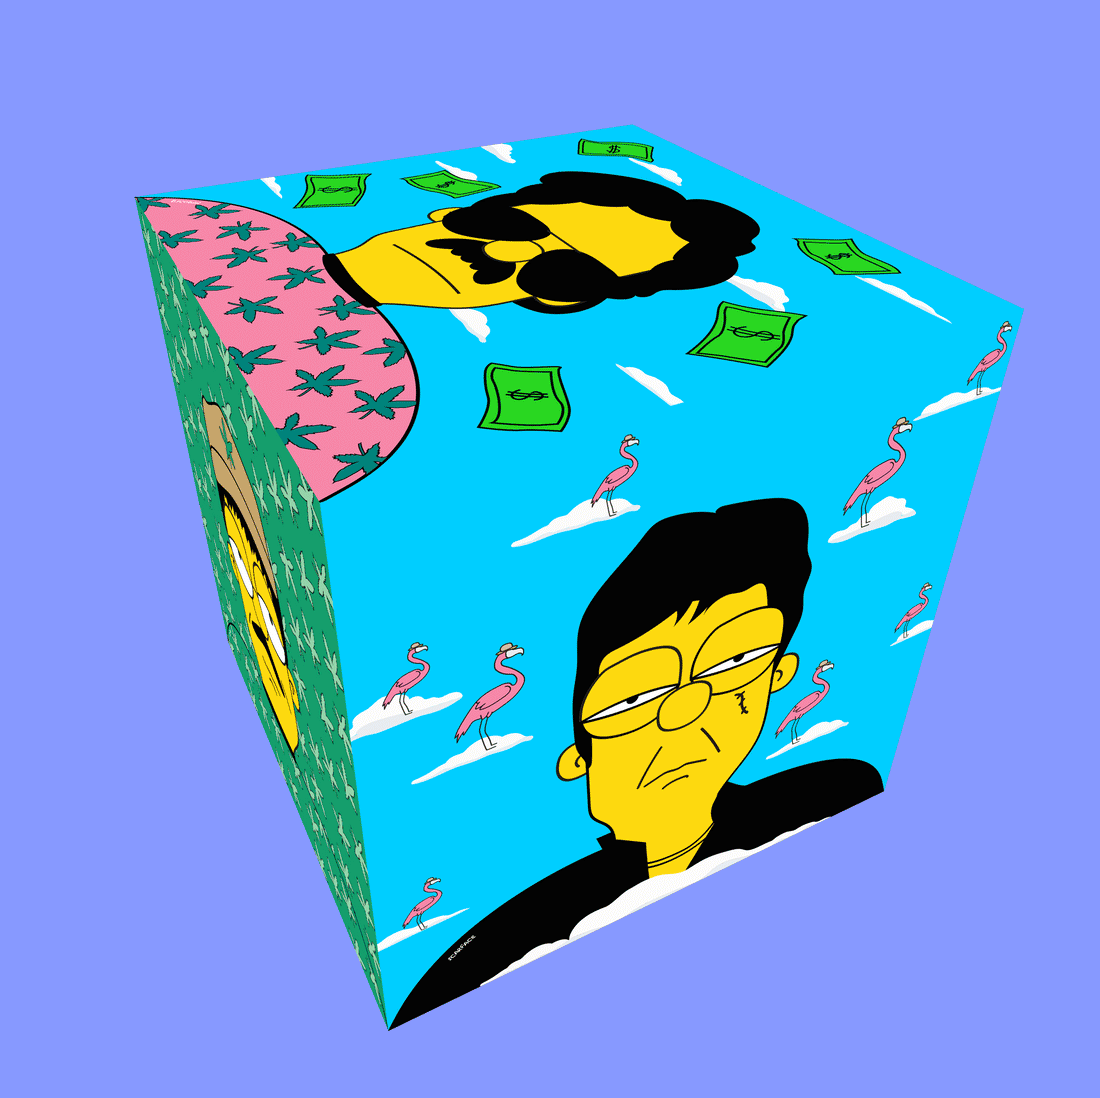 Narco Cube NFTable with illustration of el Chapo, al Capone, scarface, Pablo escobar, The Godfather 